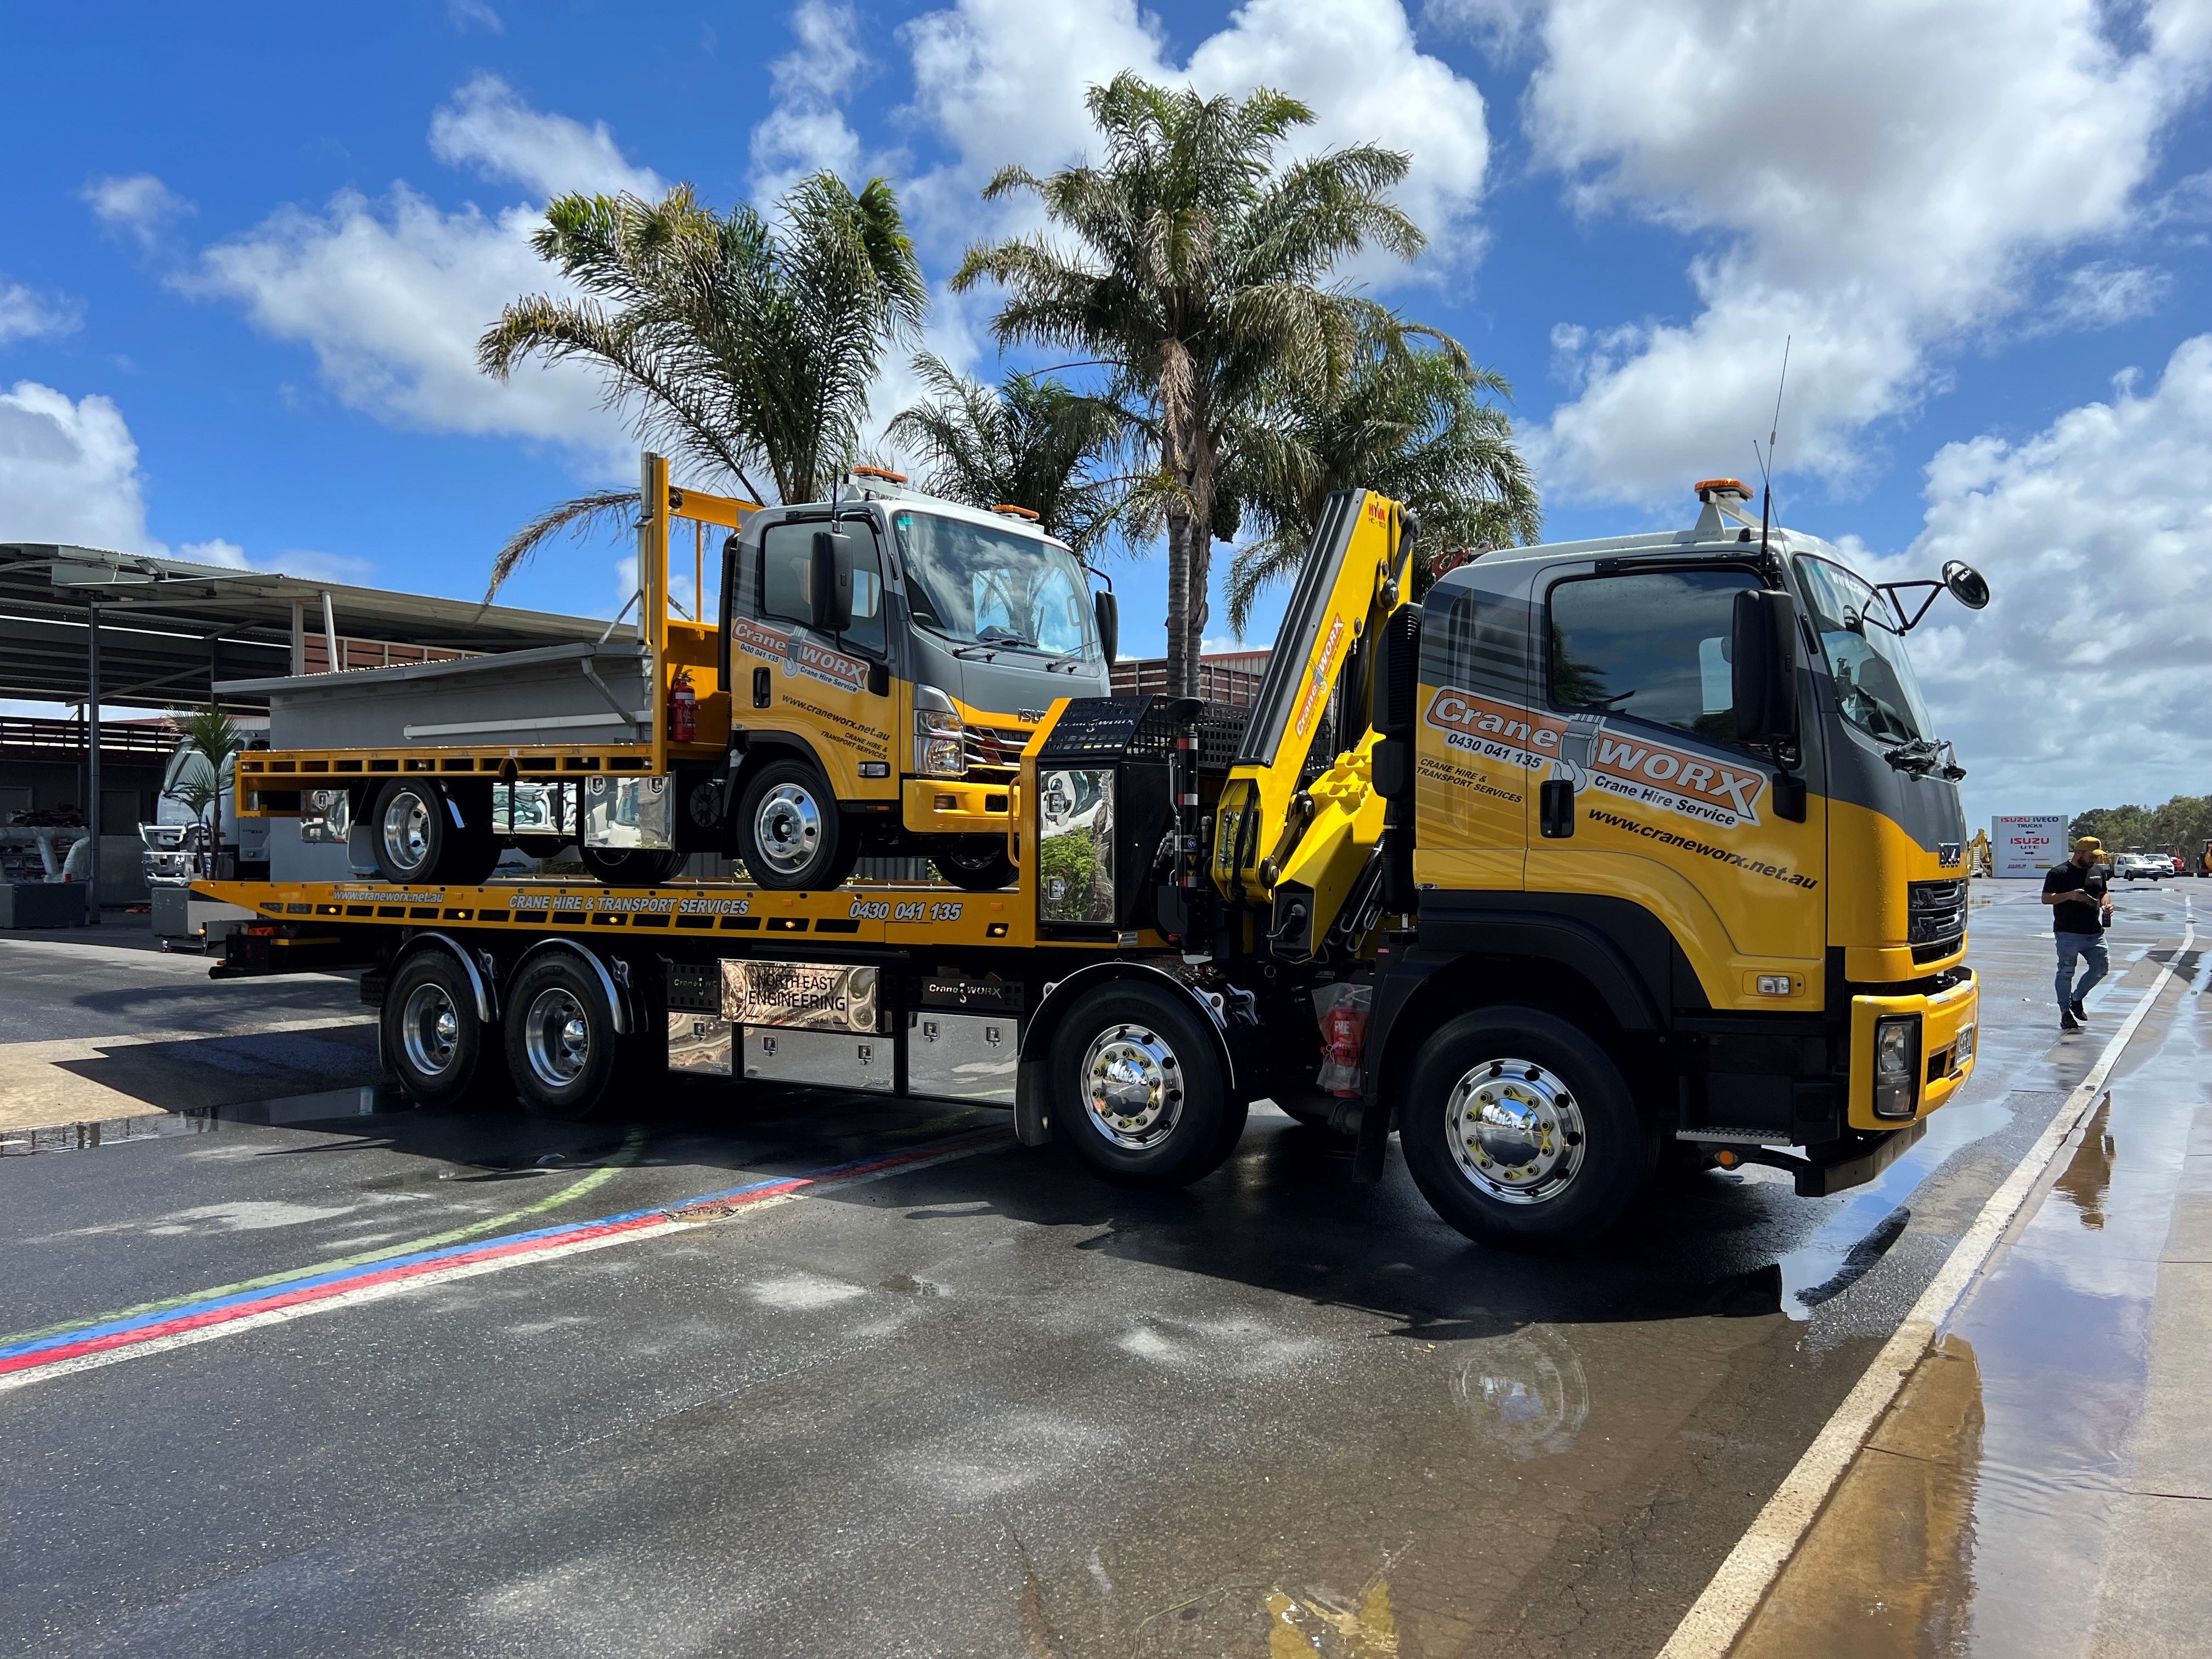 The Craneworx NQR 87-190 ‘Mini Me’ on the tray of the company’s FYJ 300-350 which won the 2022 Truck of the Year Grand Prize.